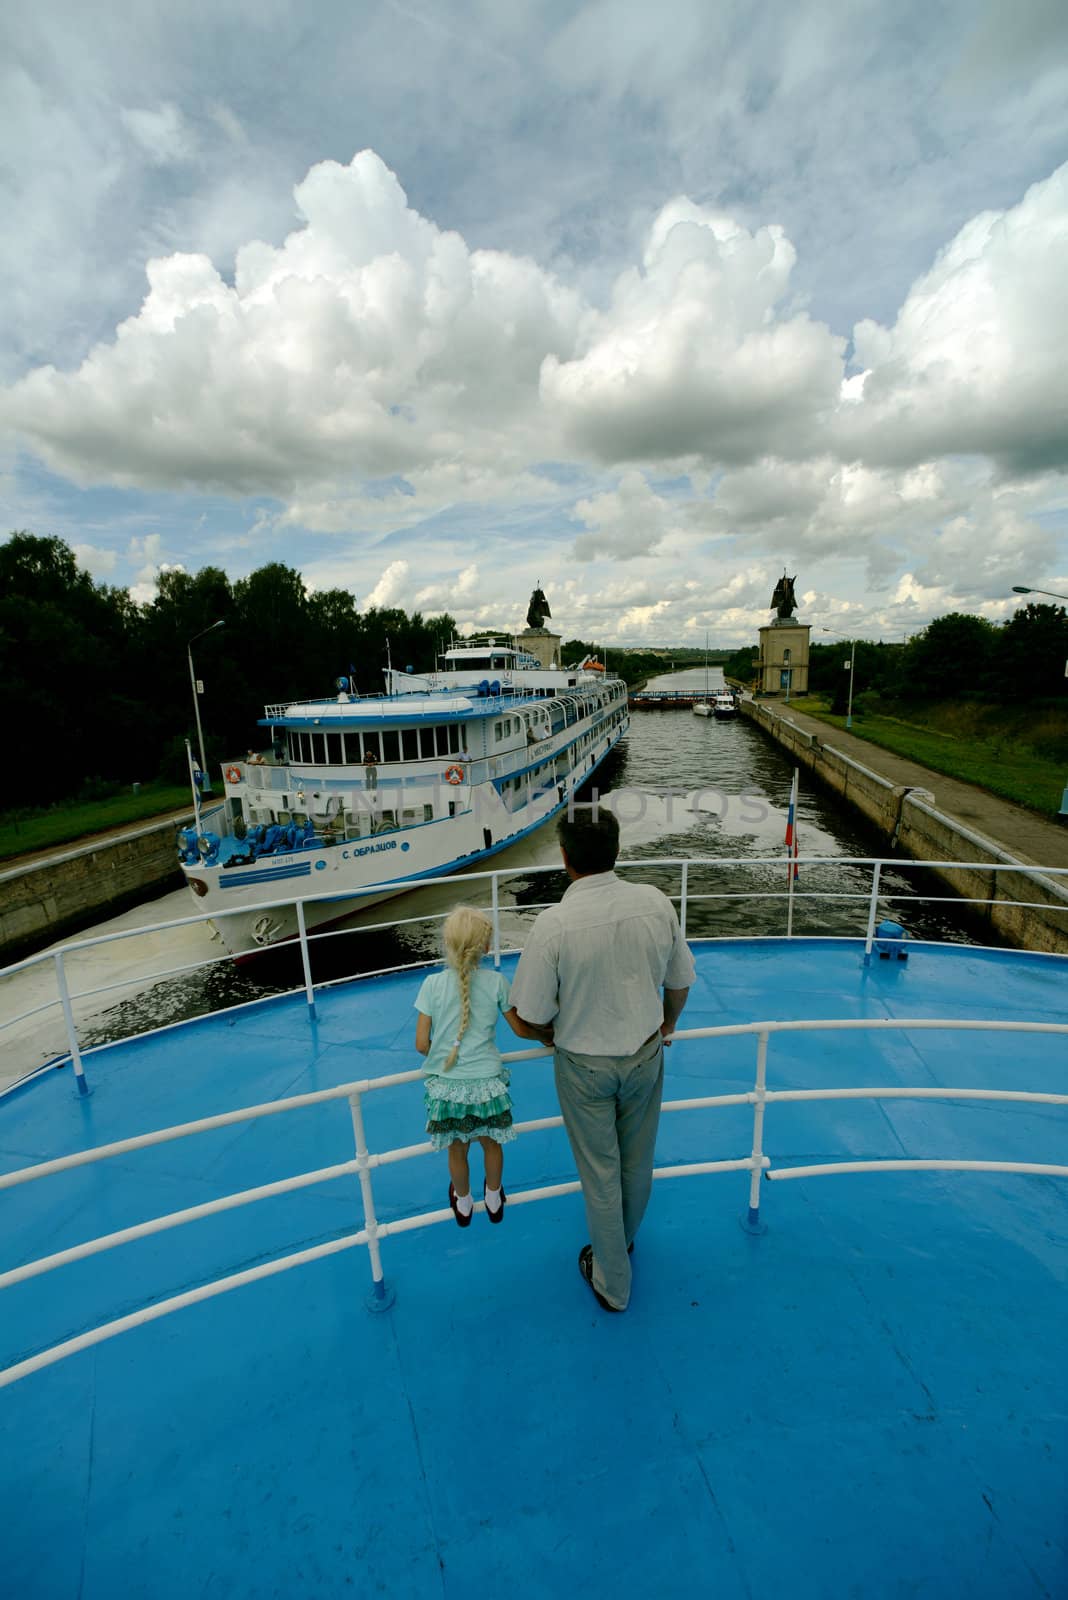 Father and daughter on the board of cruise ship. Taken on Volga river, Russia on July 2012